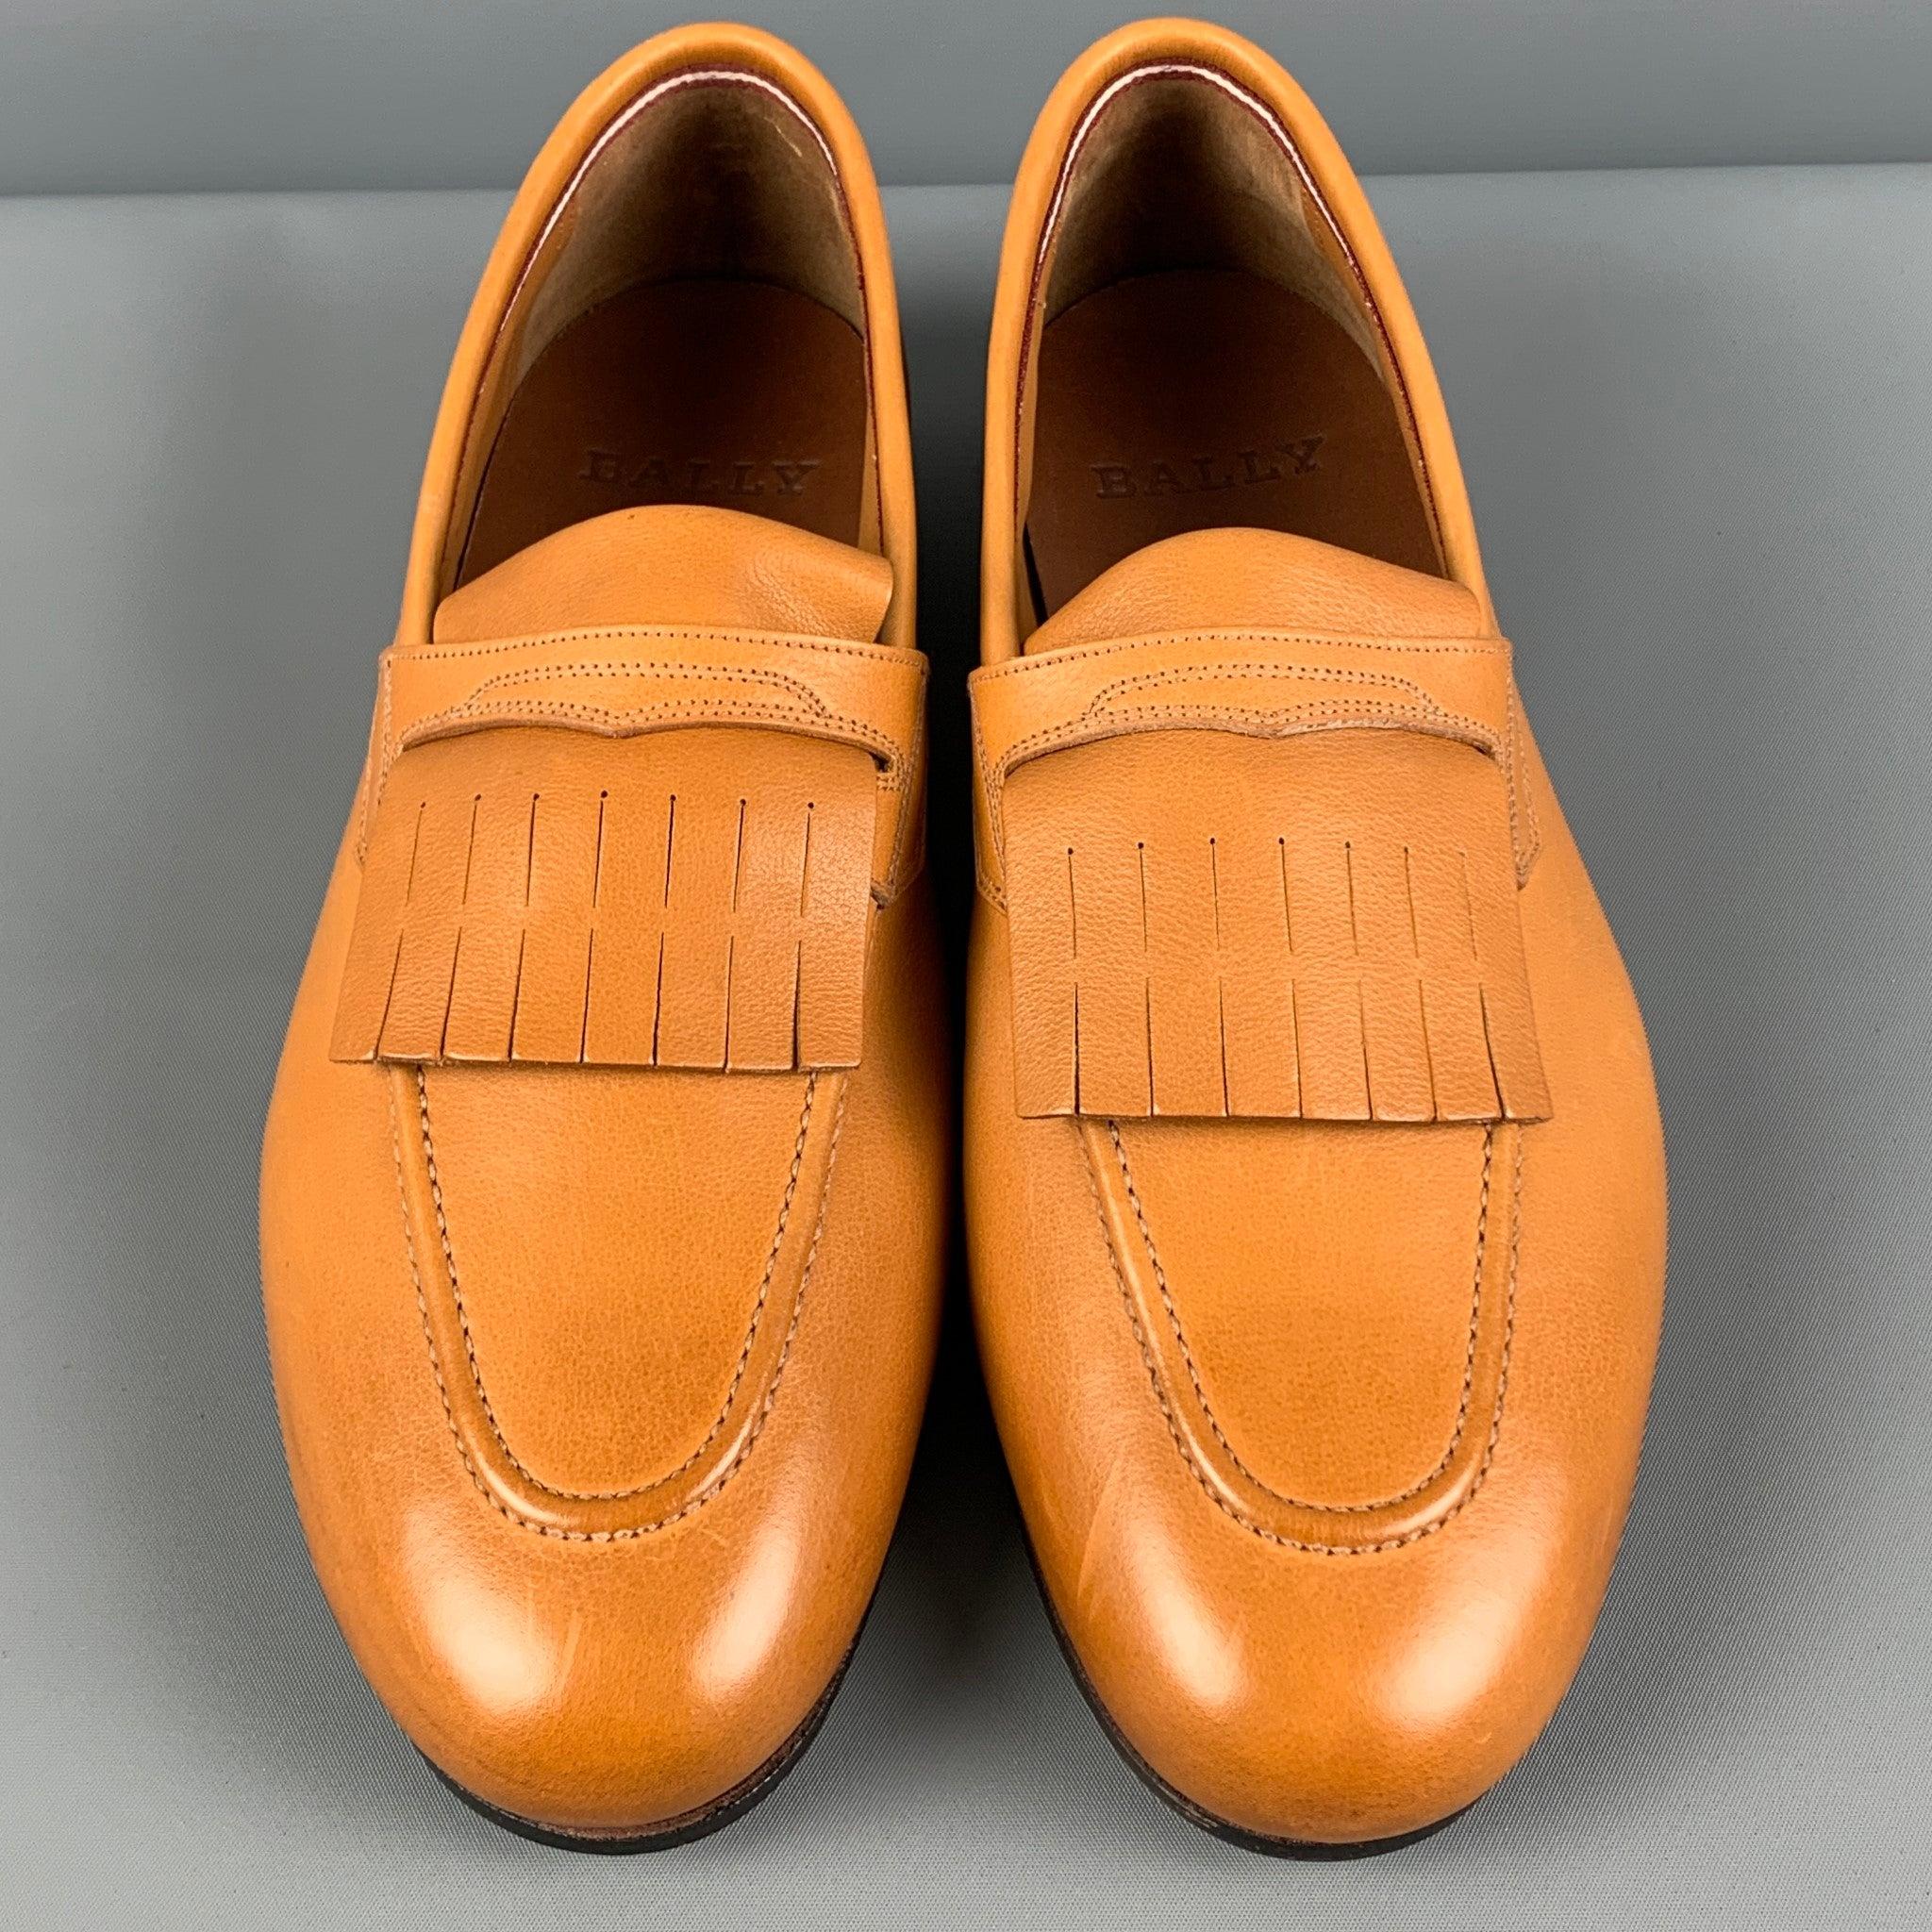 Men's BALLY Size 7.5 Honey Leather Slip On Loafers For Sale